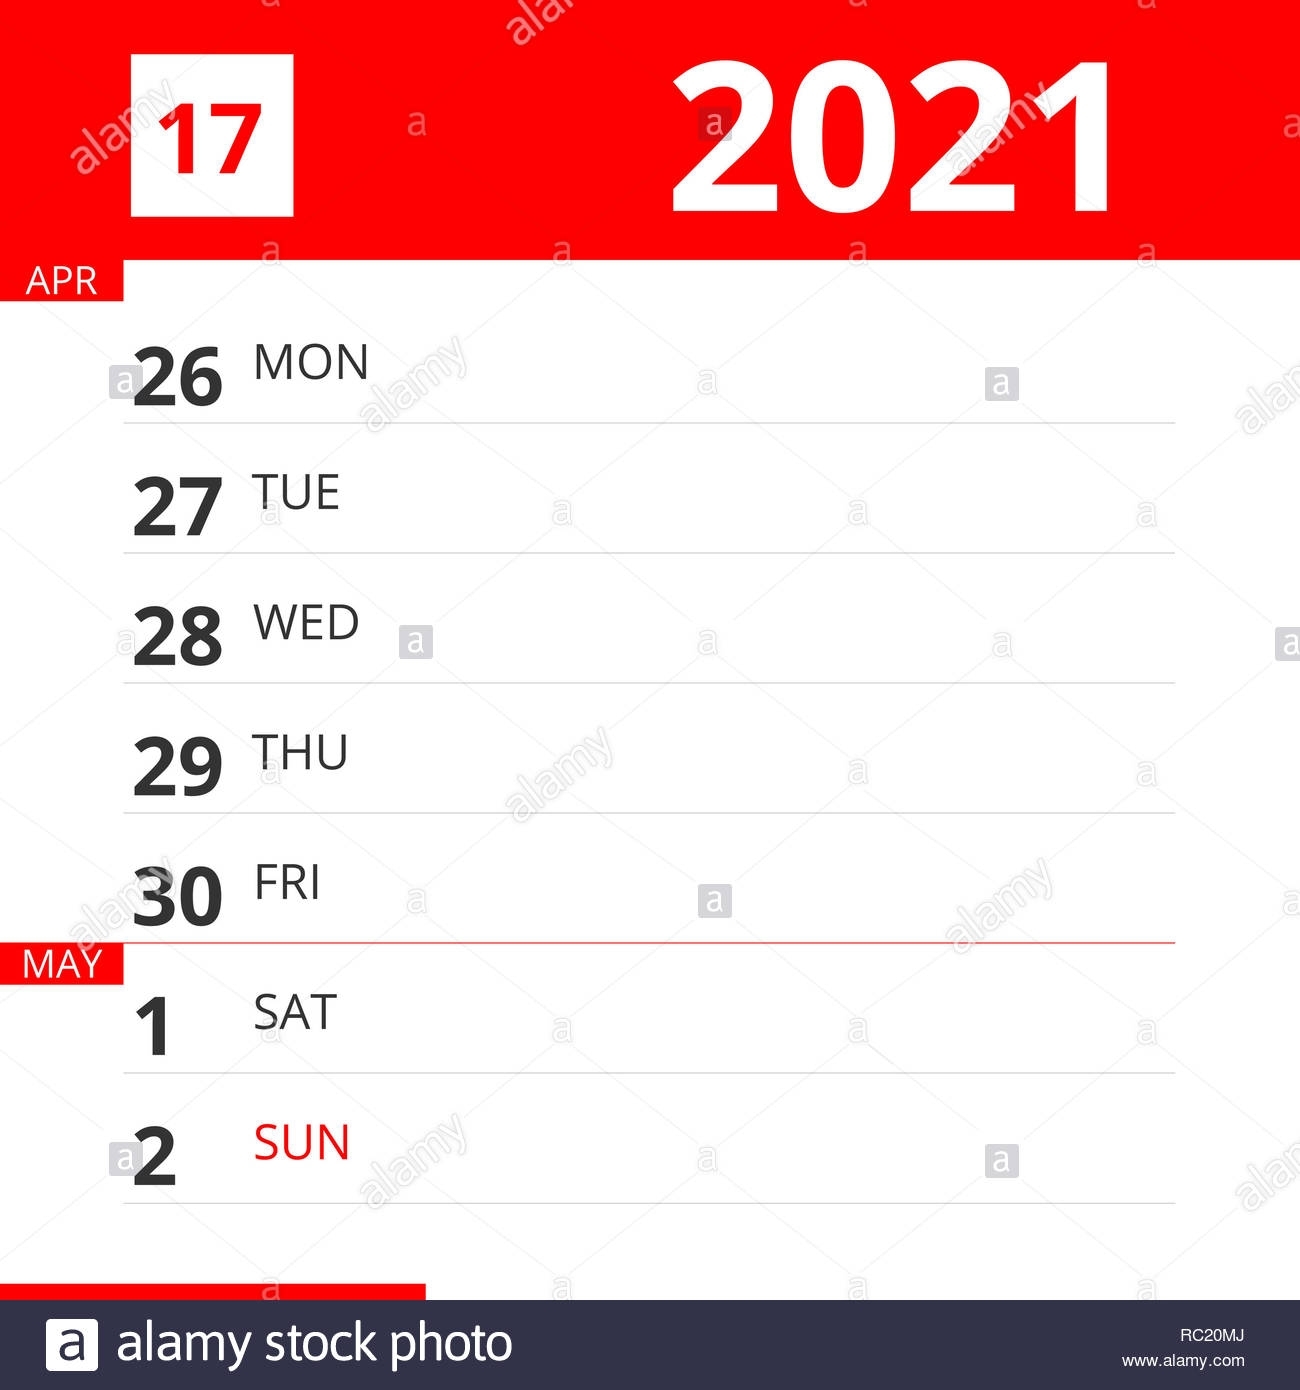 Calendar Planner For Week 17 In 2021, Ends May 2, 2021 Stock